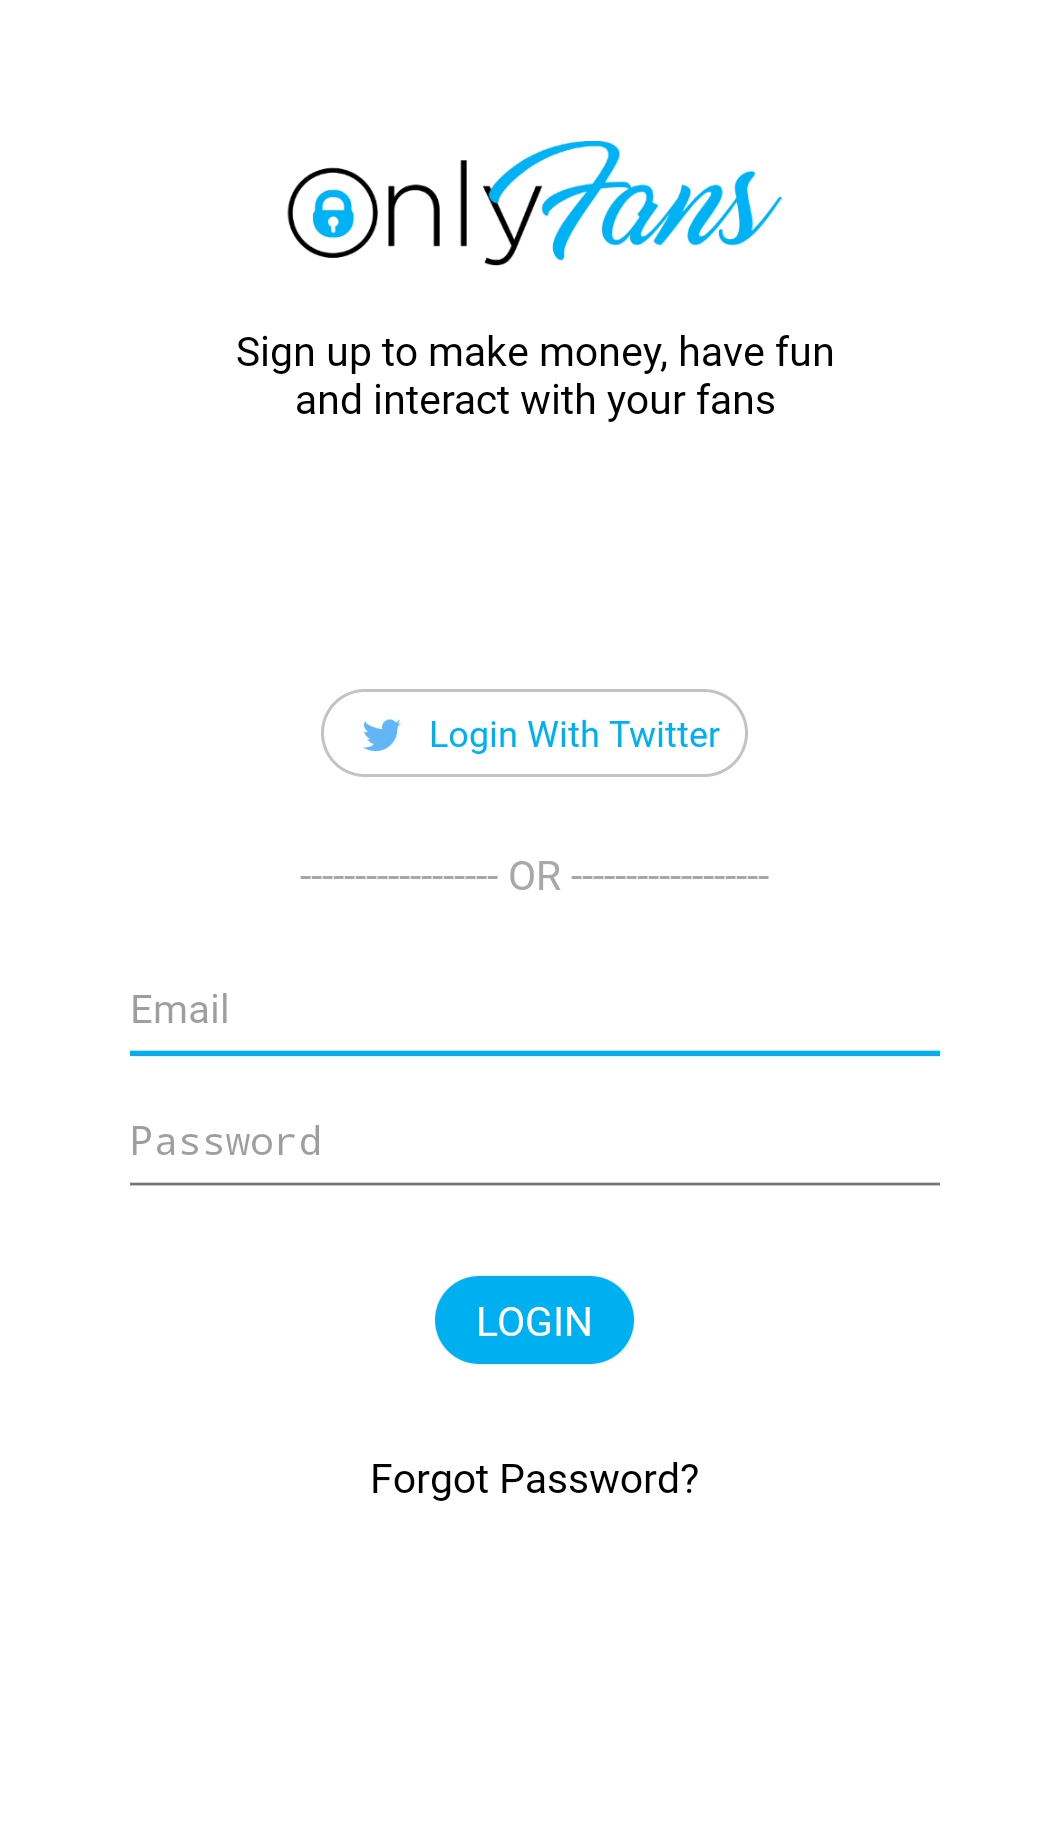 Log in again for fans only